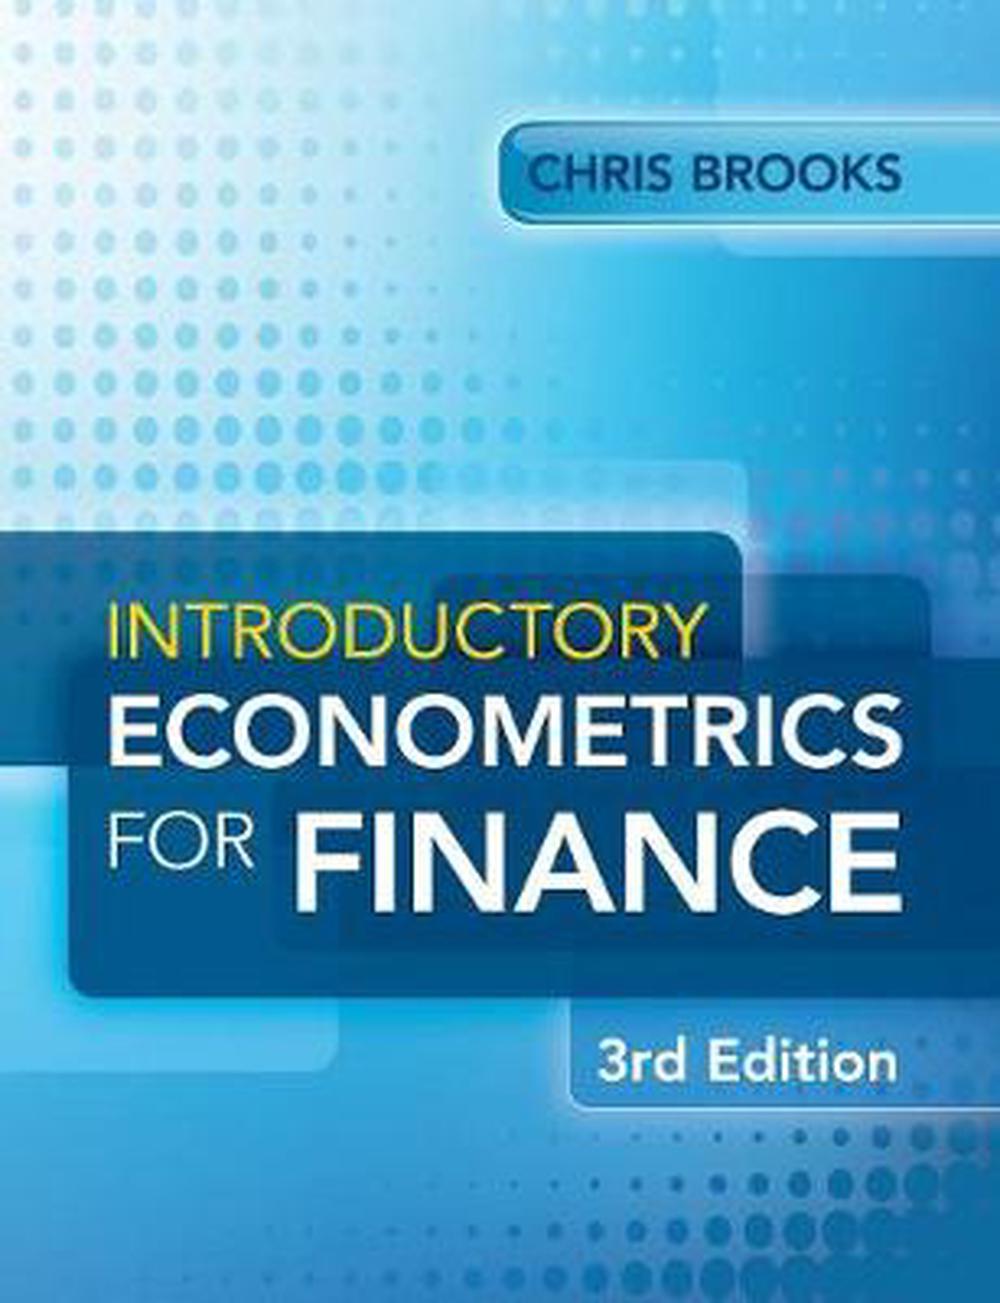 Introductory Econometrics for Finance, 3rd Edition by Chris Brooks, Paperback, 9781107661455